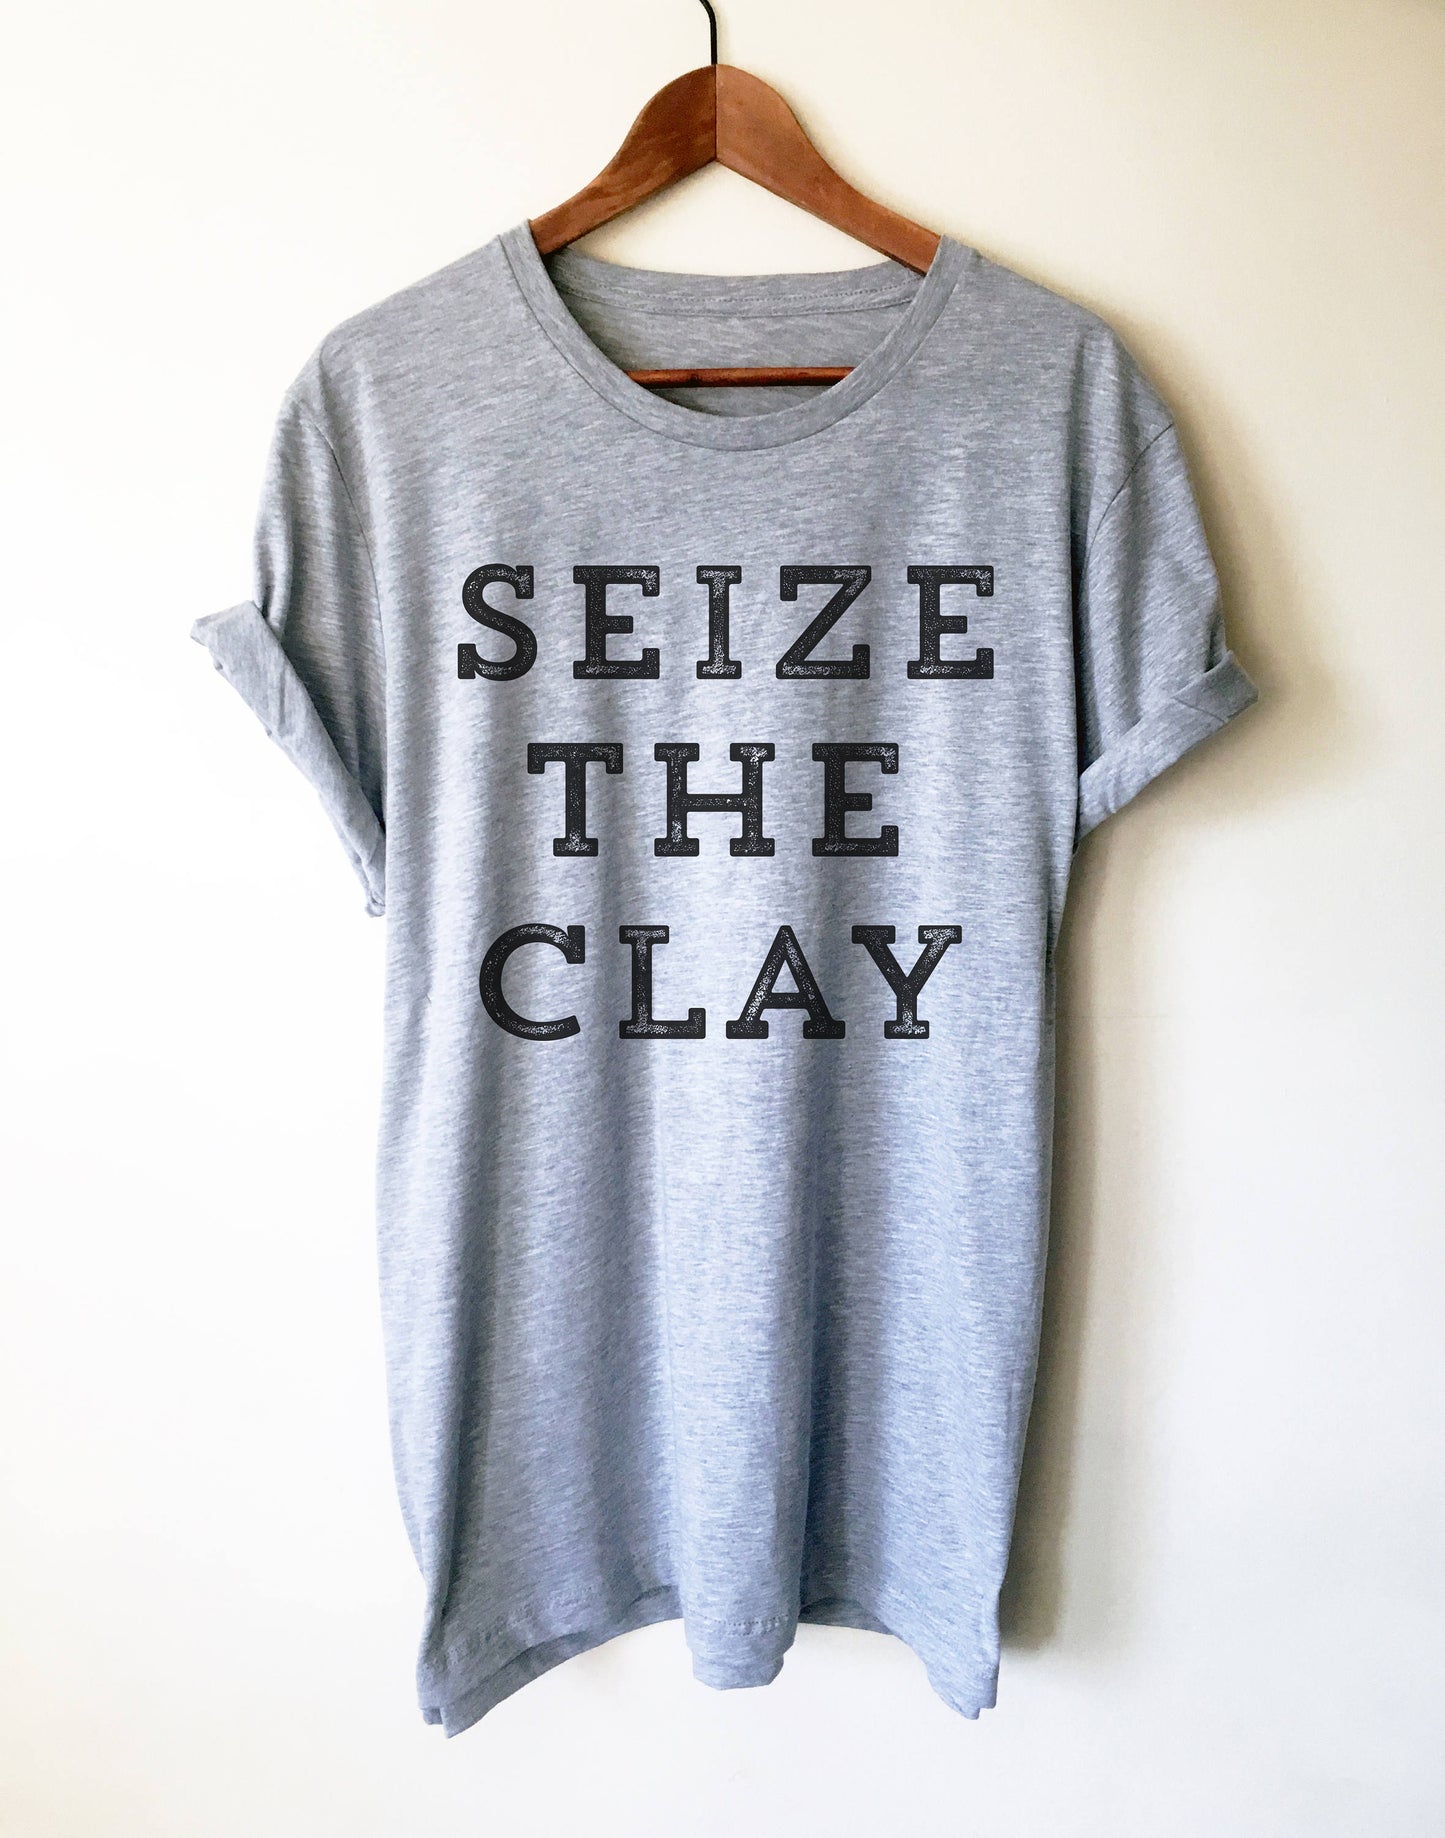 Seize The Clay Unisex Shirt - Pottery shirt | Pottery lover | Funny pottery shirt | Ceramics and pottery | Pottery gift